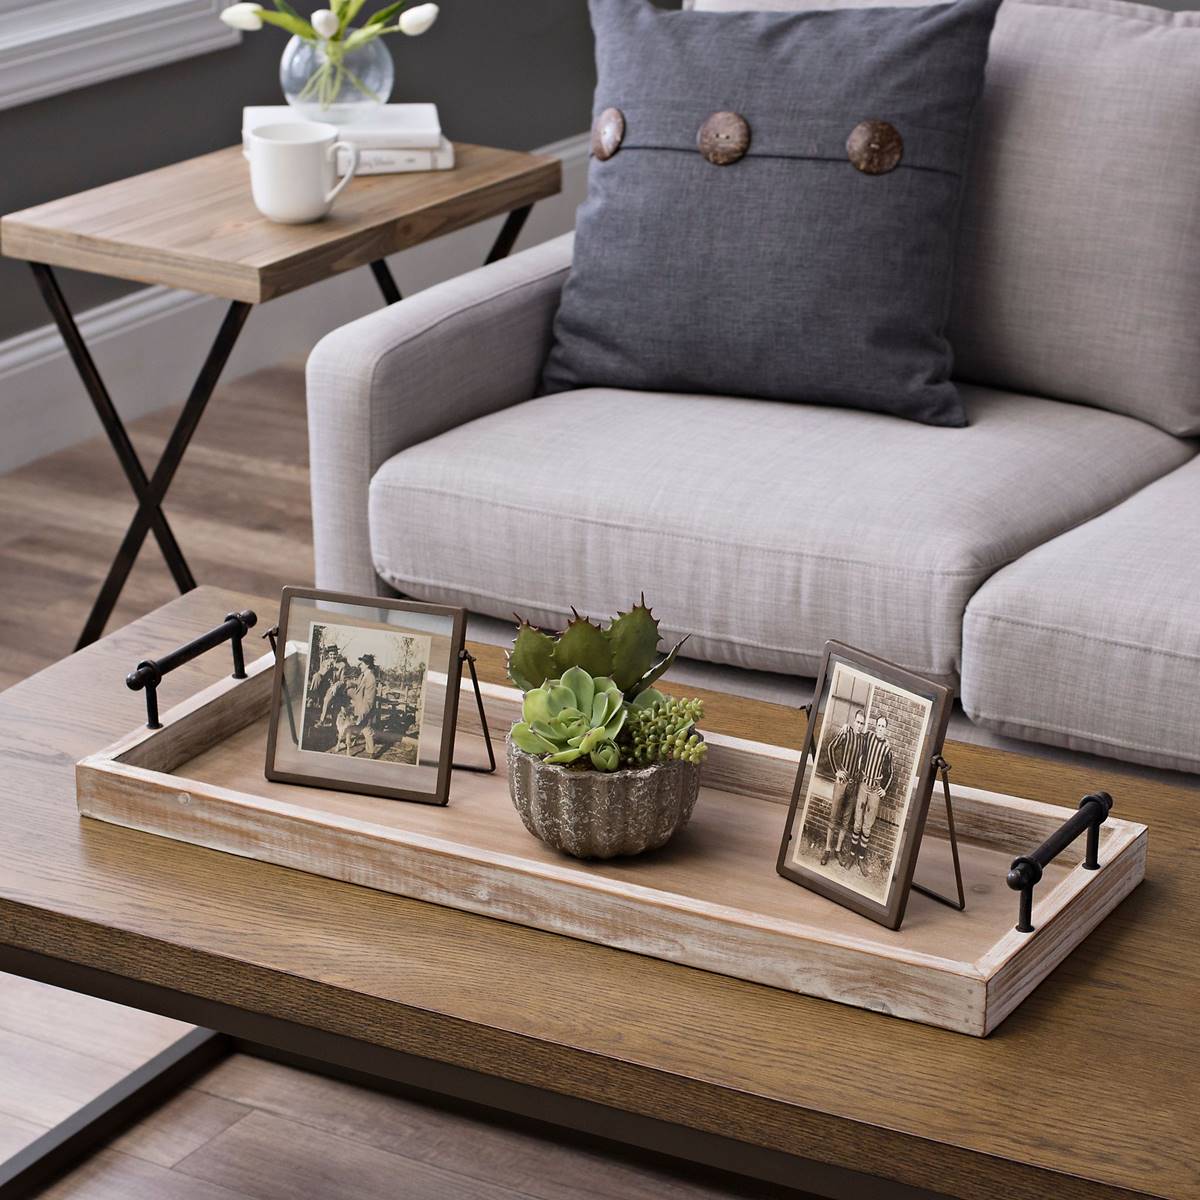 What To Put On A Decorative Tray